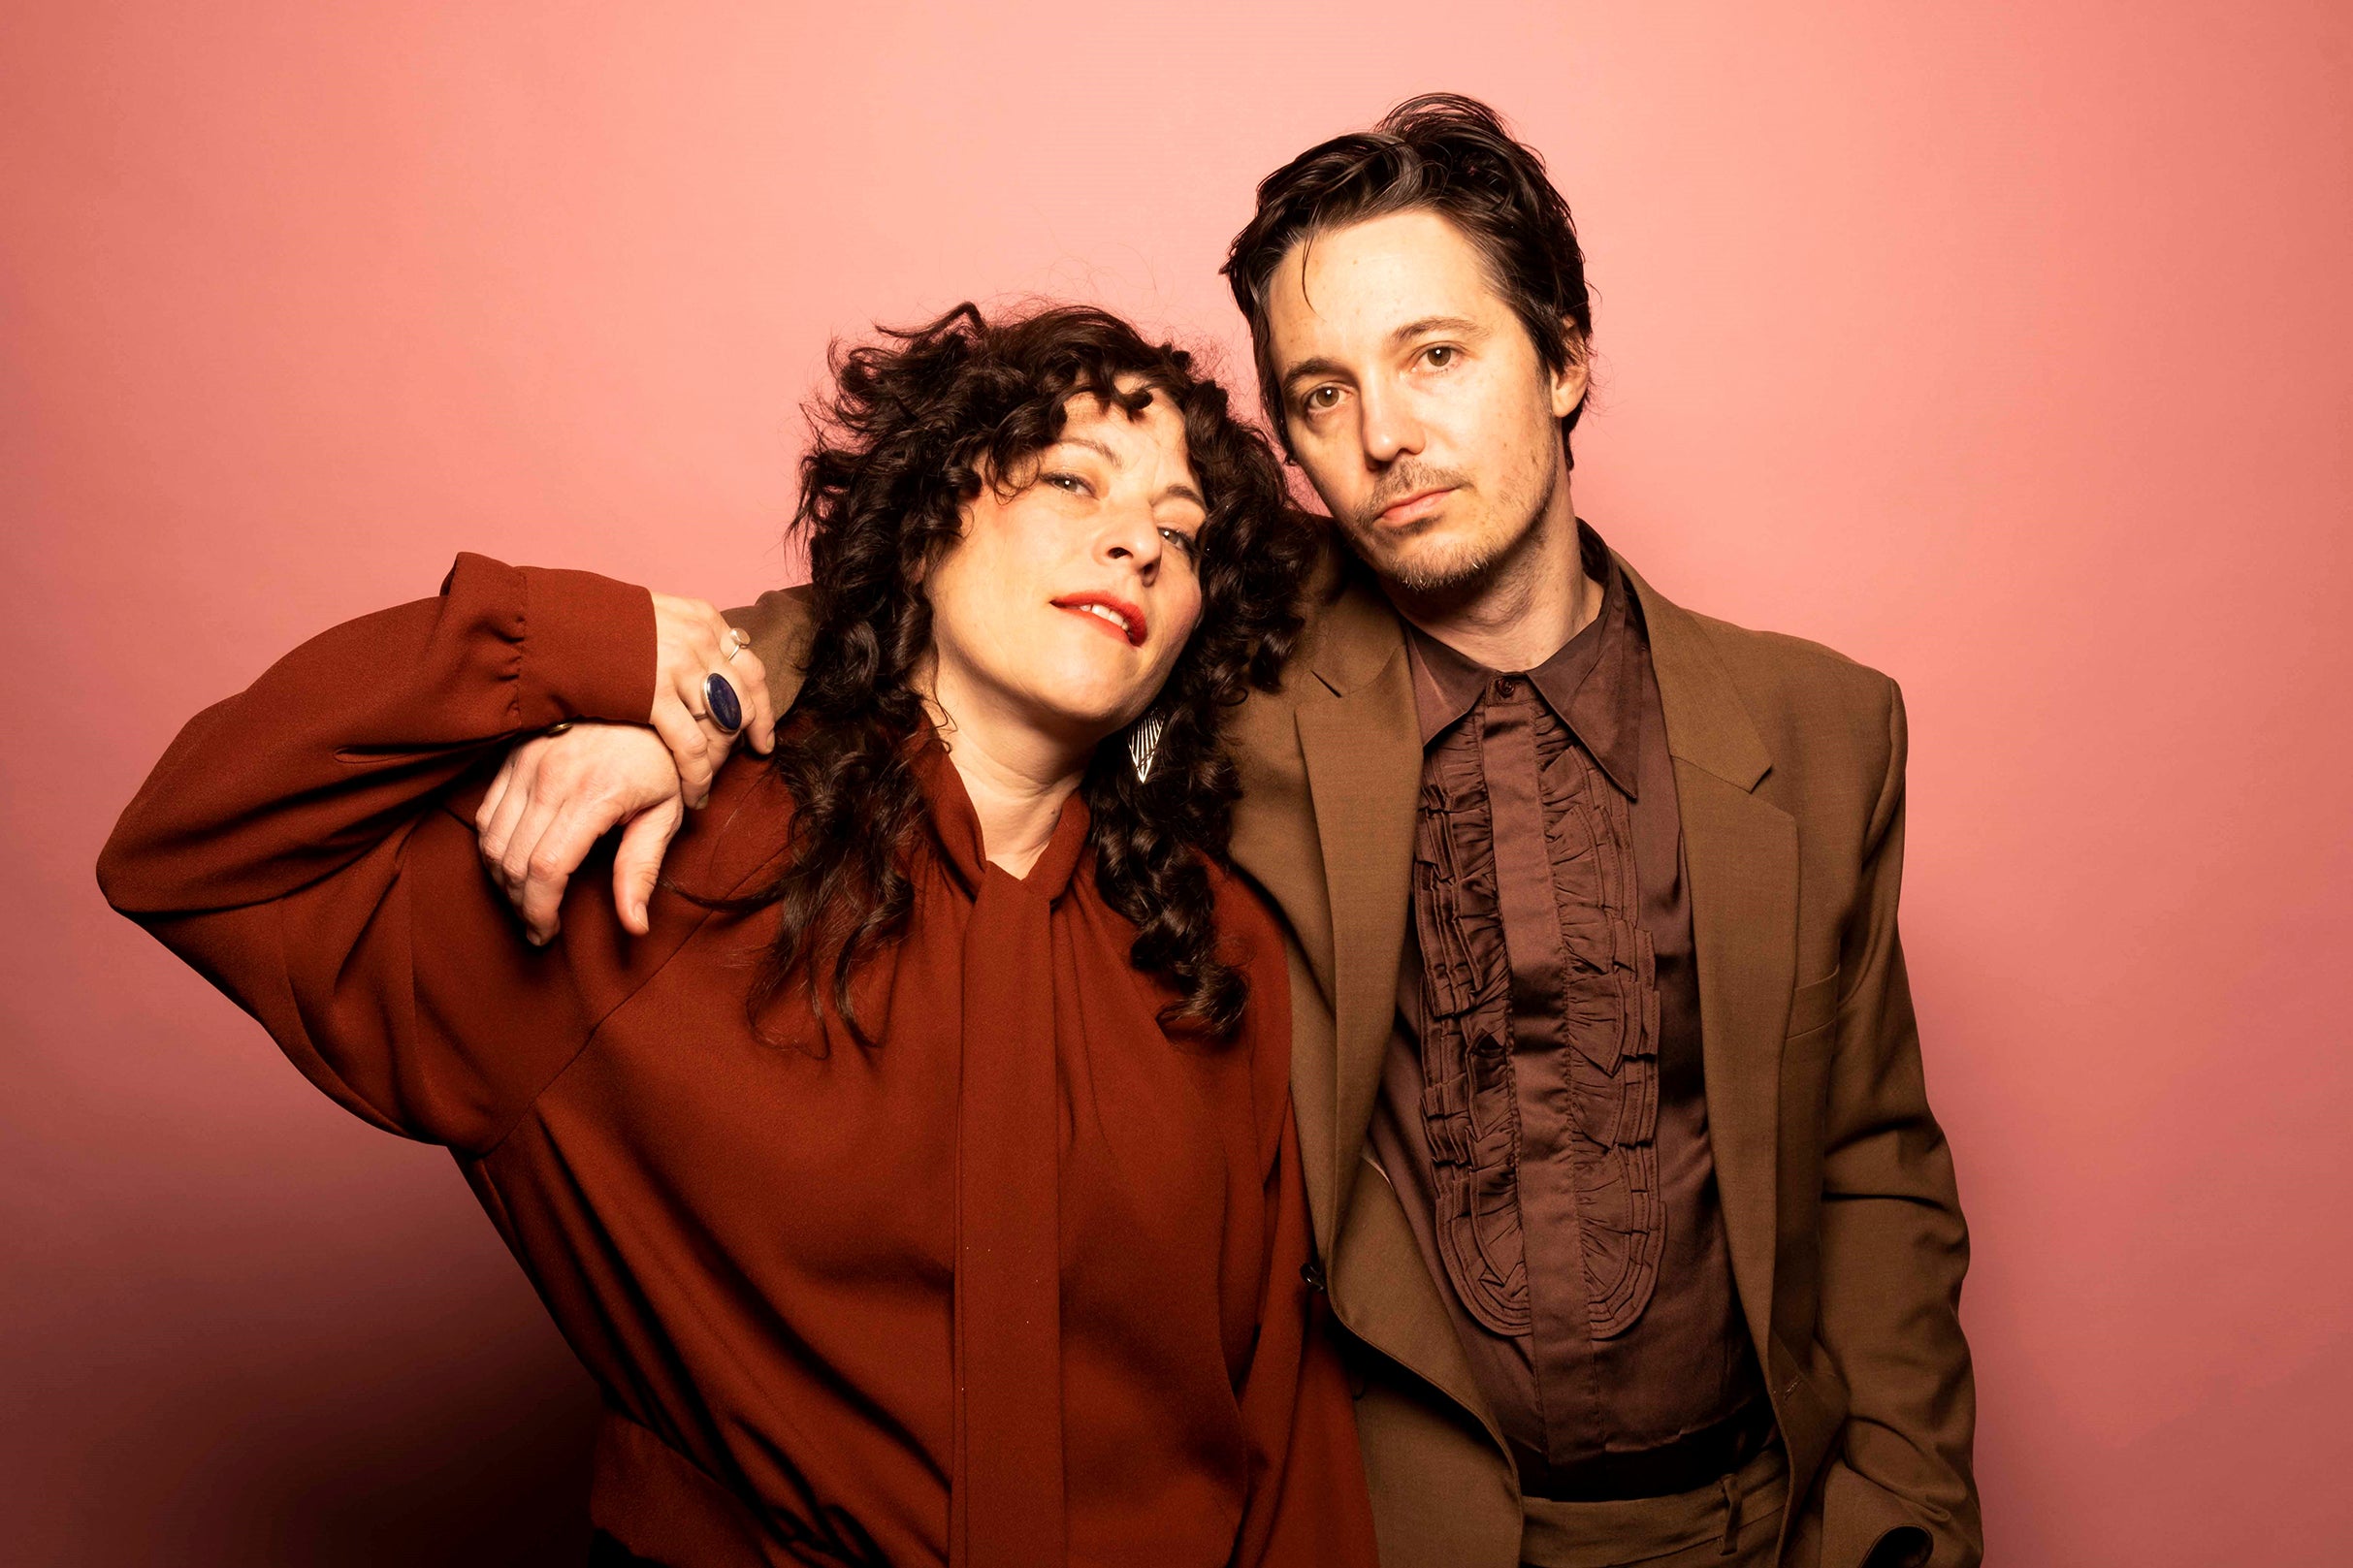 Shovels & Rope in Seattle promo photo for Local presale offer code